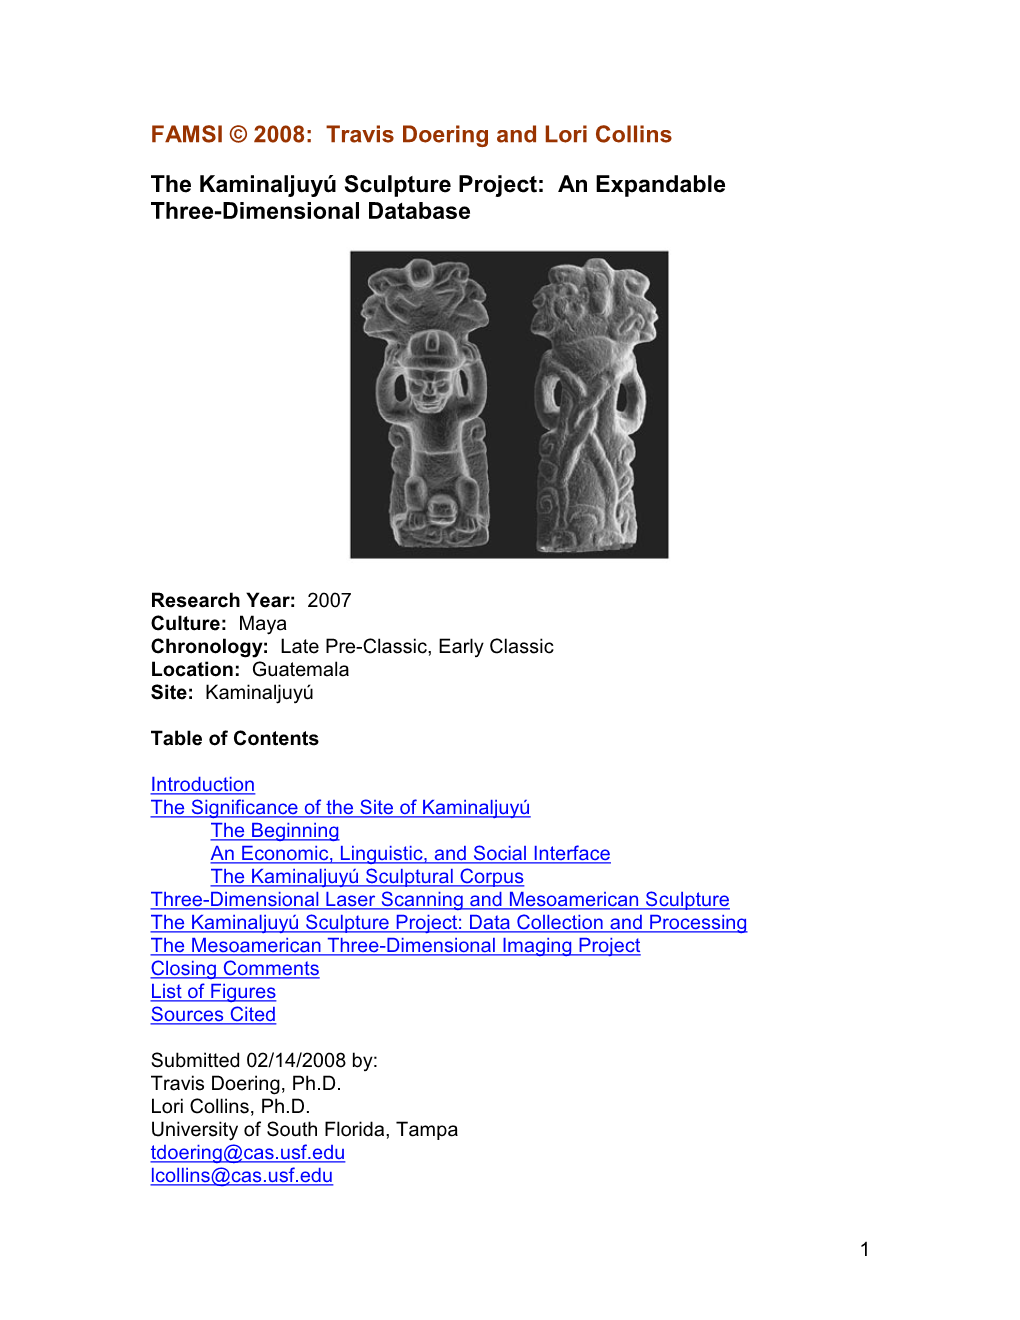 The Kaminaljuyú Sculpture Project: an Expandable Three-Dimensional Database